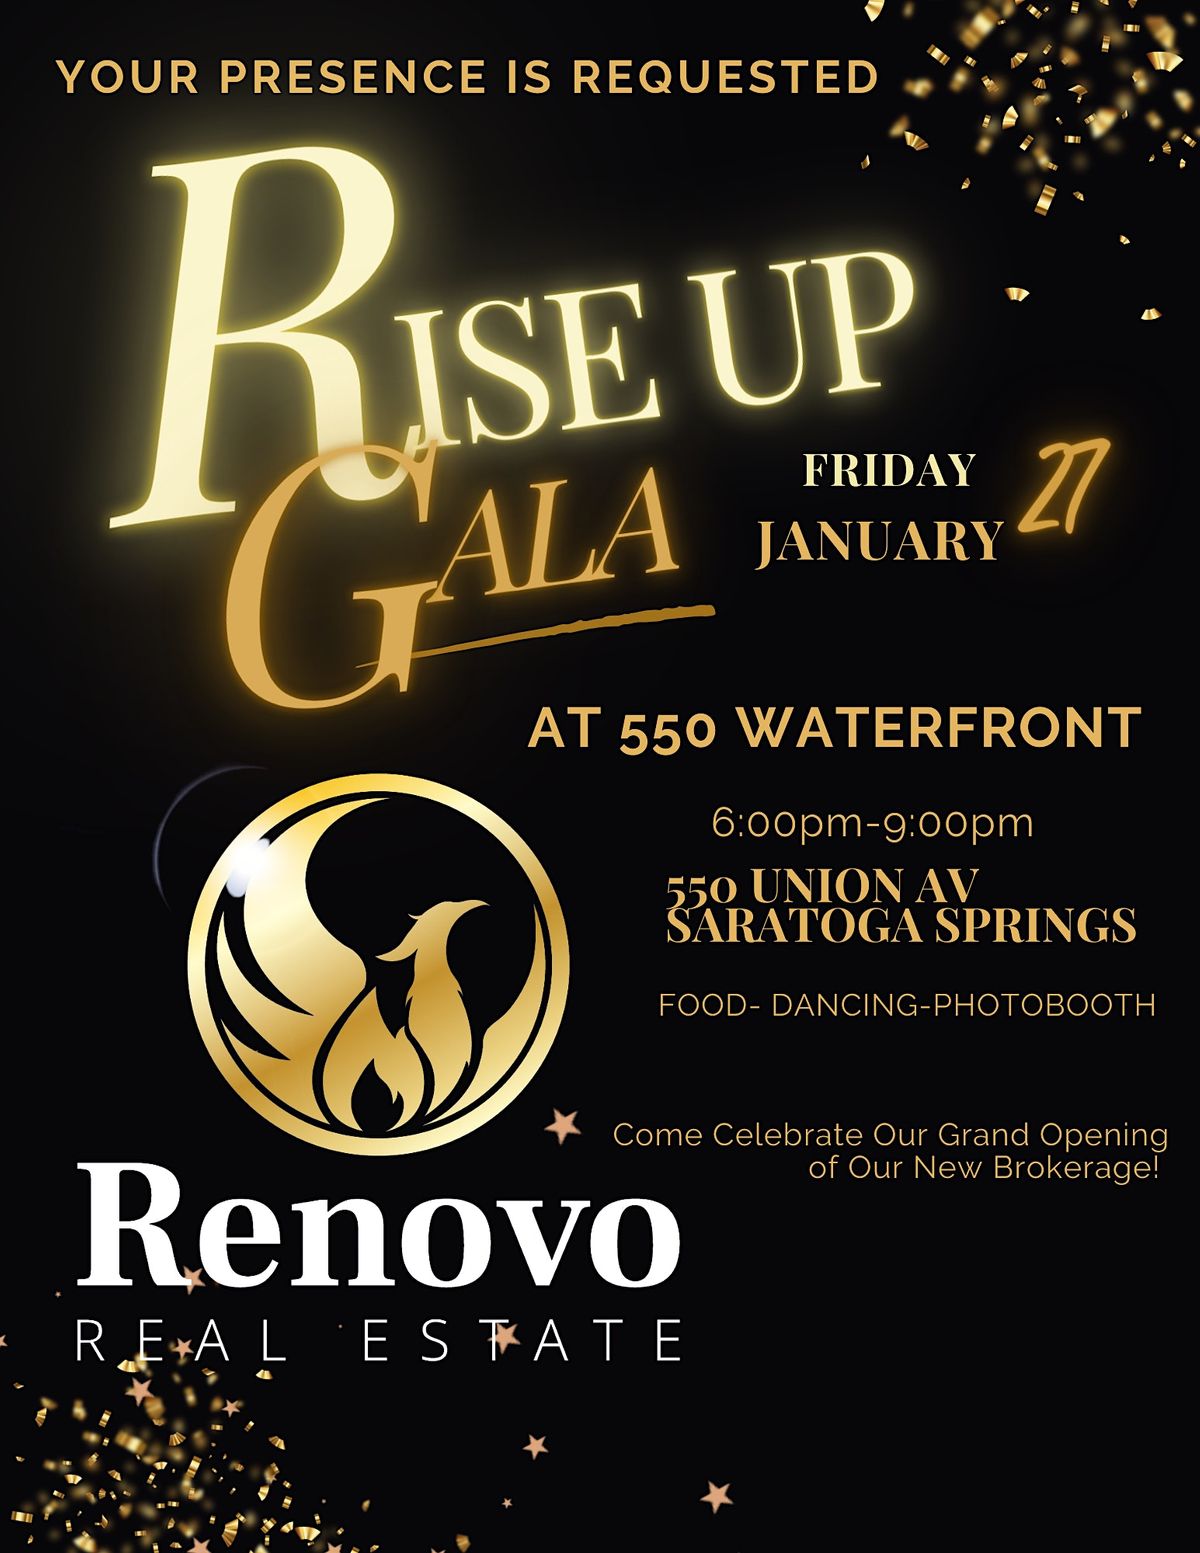 RISE UP GALA RENOVO REAL ESTATE GRAND OPENING PARTY 550 Waterfront